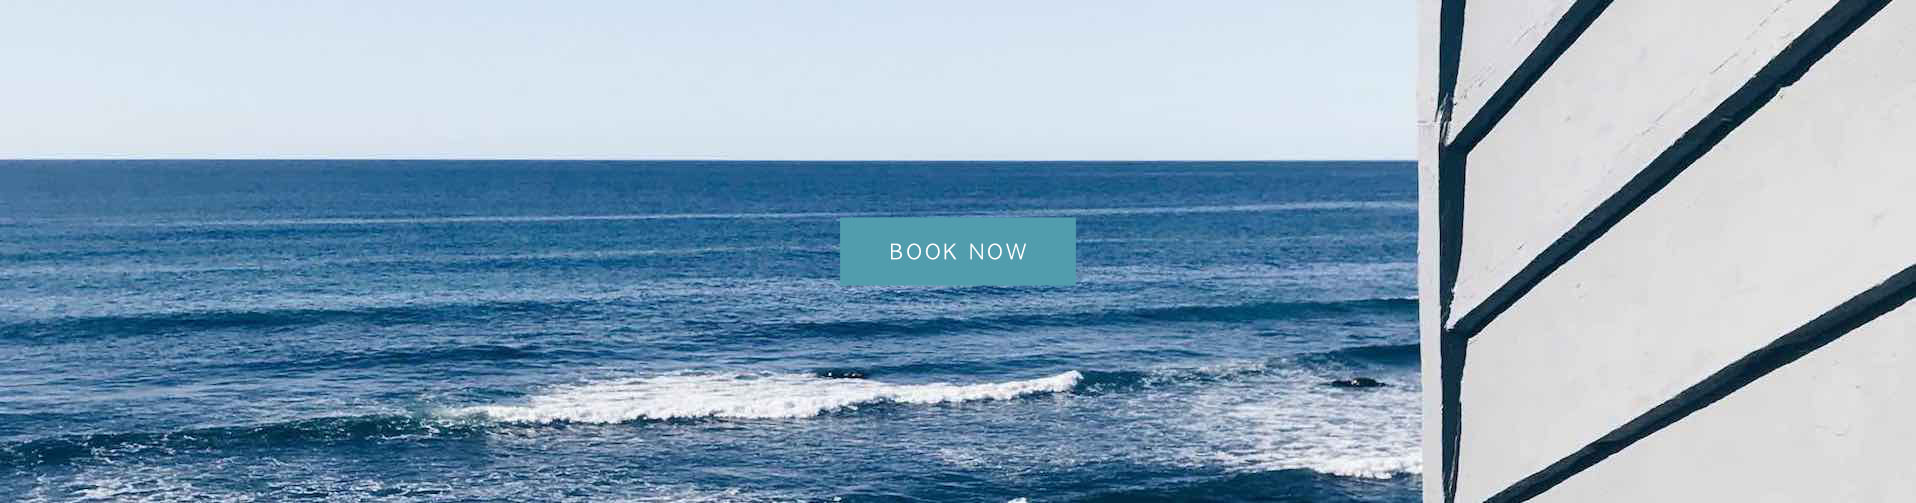 Oceanfront Holiday Accommodation on Tasmania's East Coast at The Mariner